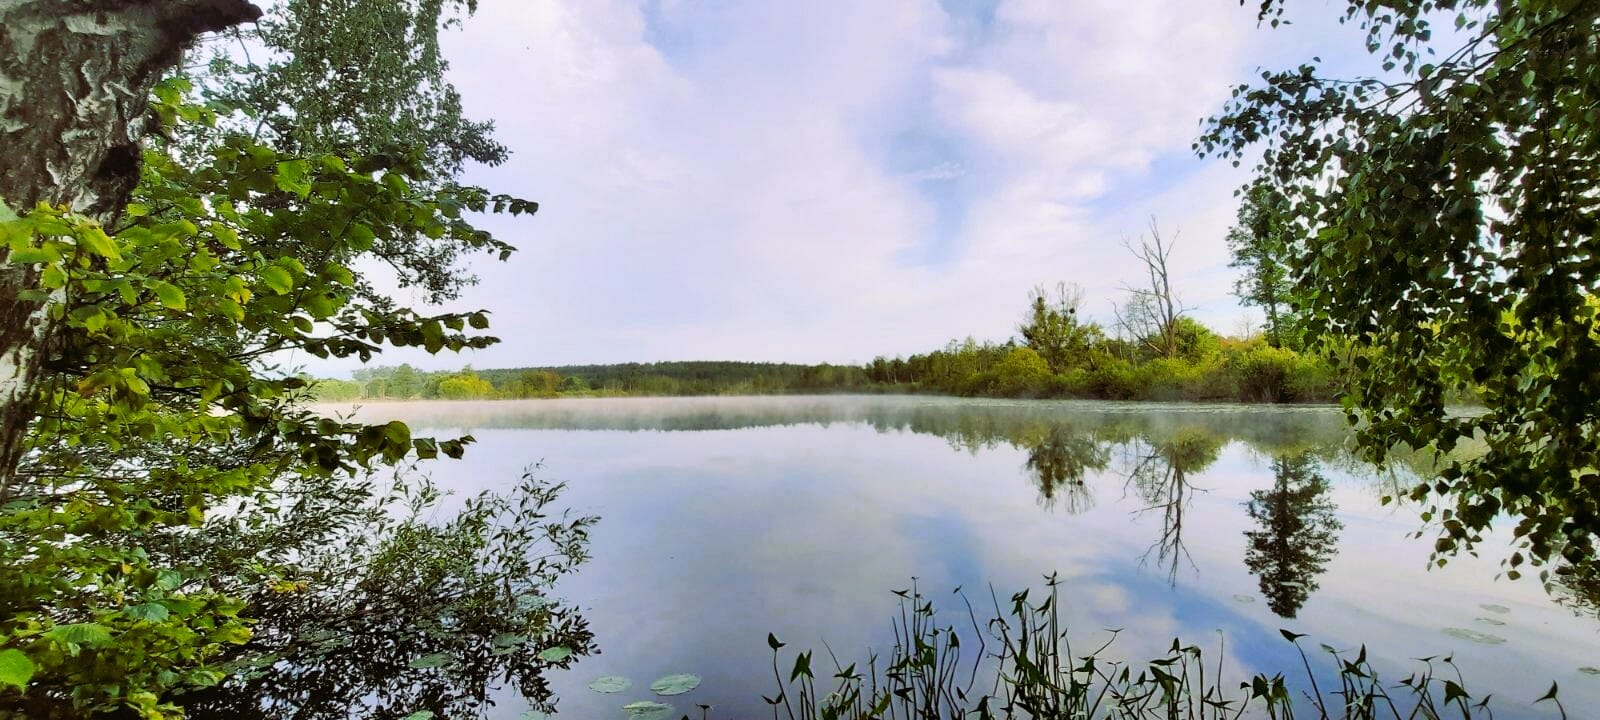 A lake at the place of a former quarry